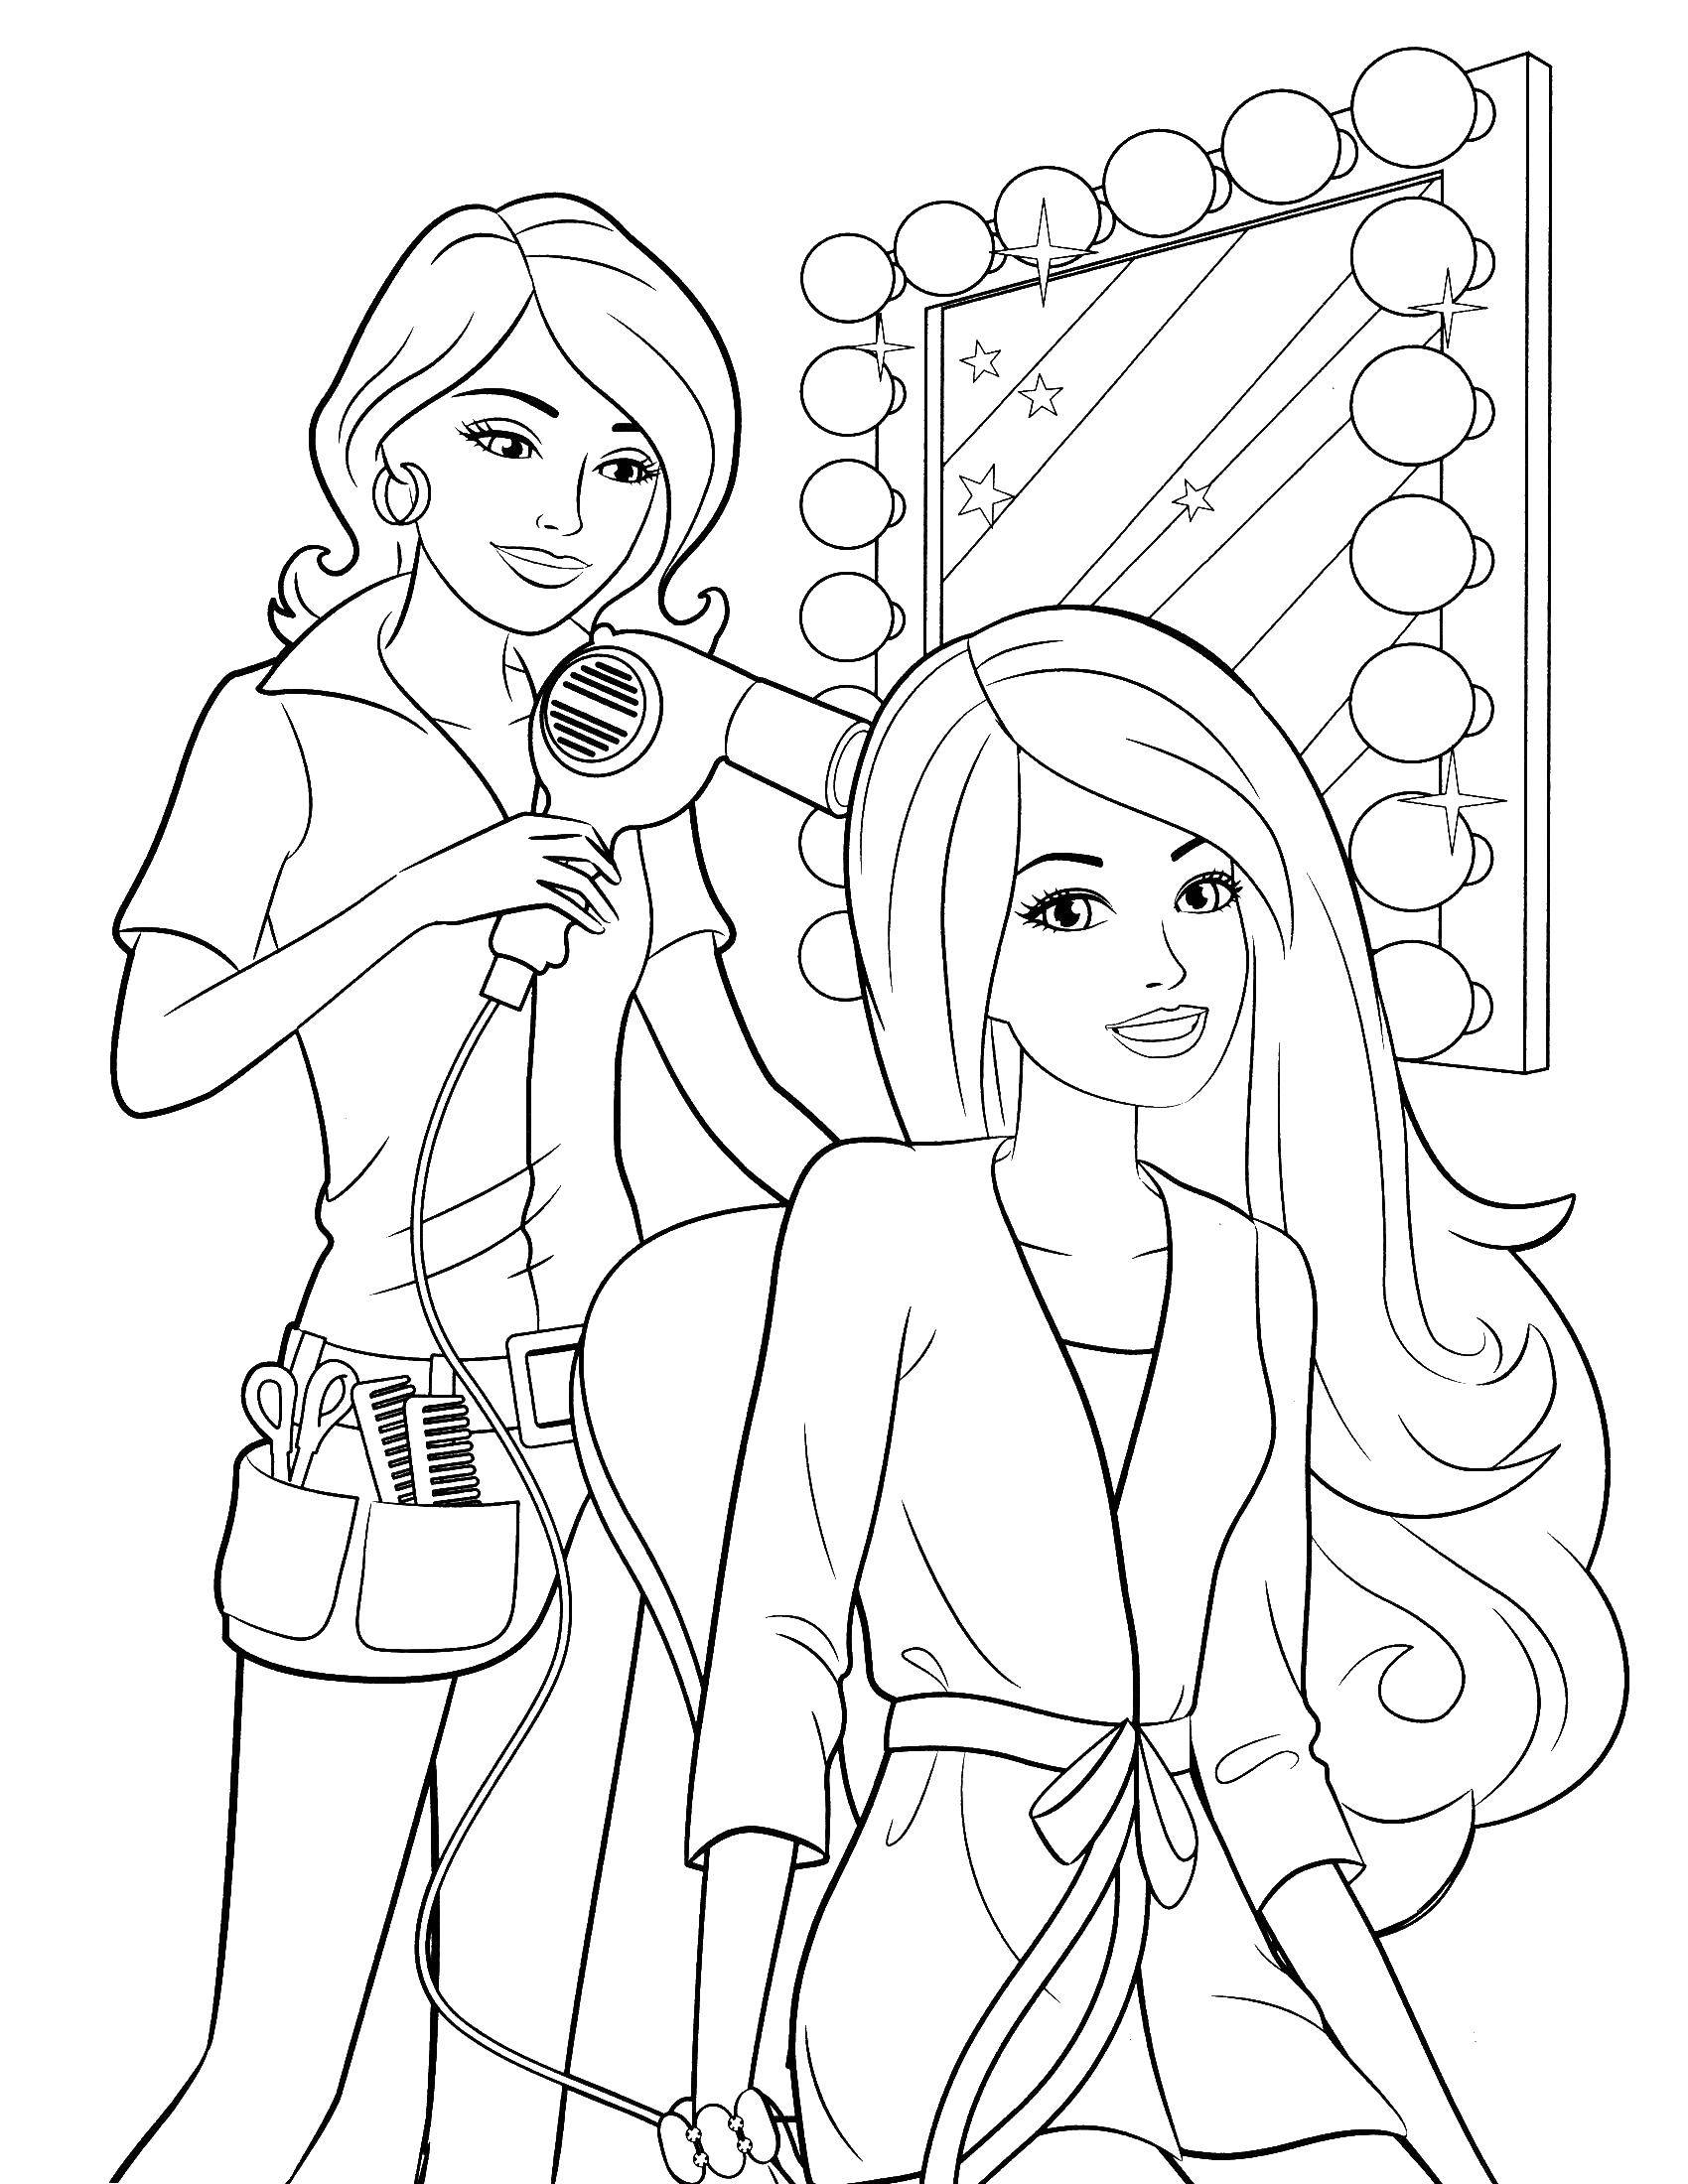 Coloring Barbie at the hairdresser. Category Barbie . Tags:  Barbie , hairdresser, hairstyle.